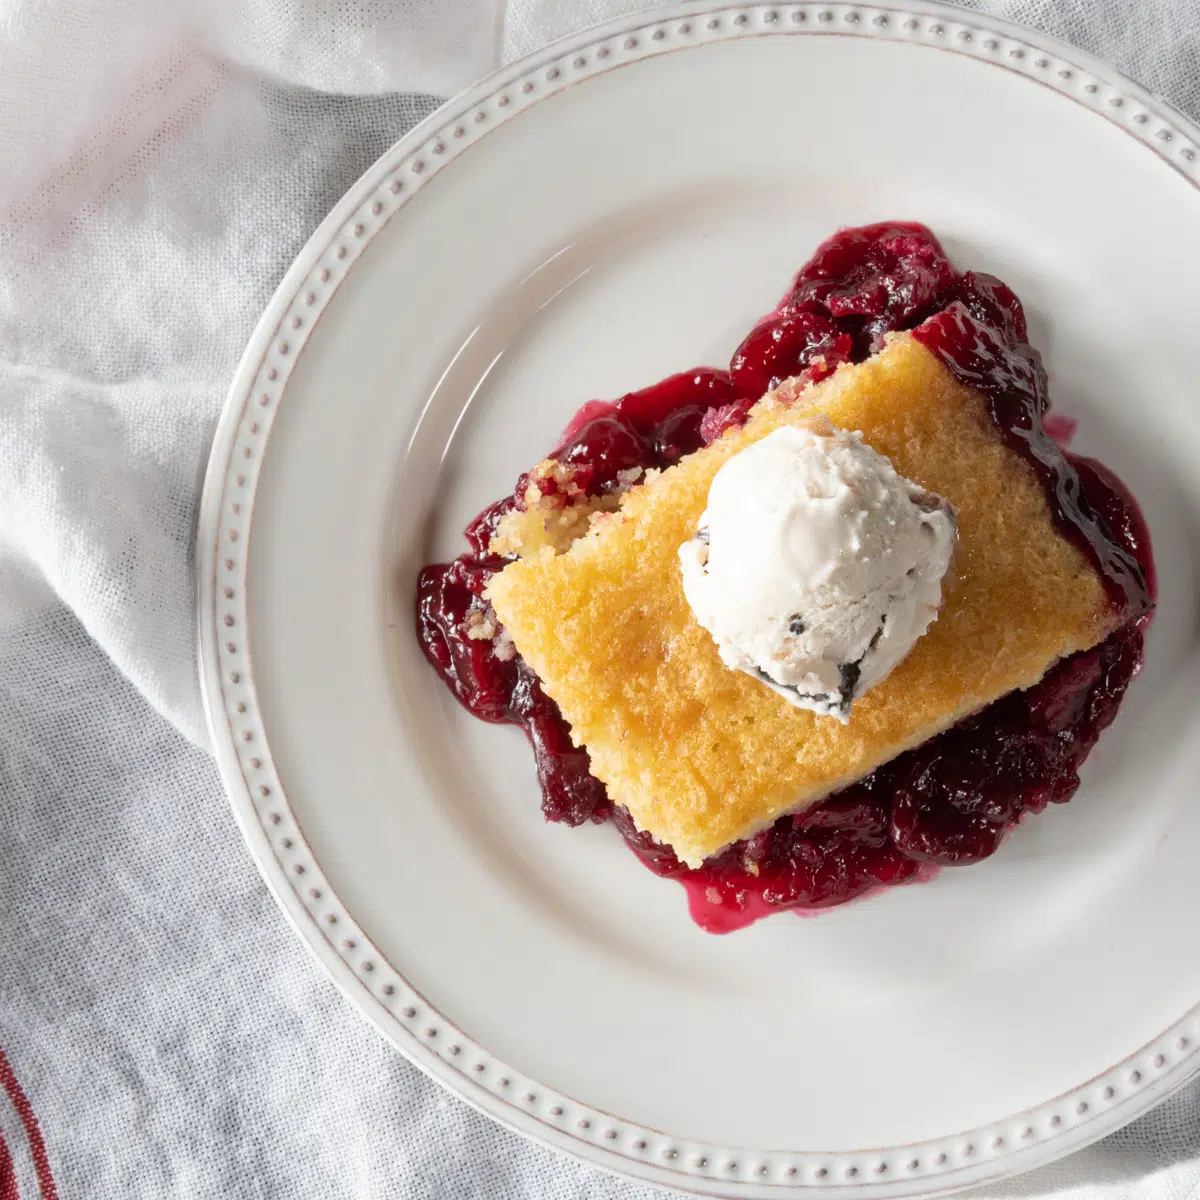 Cherry cobbler with a cake-like topping on a plate, topped with a scoop of ice cream.